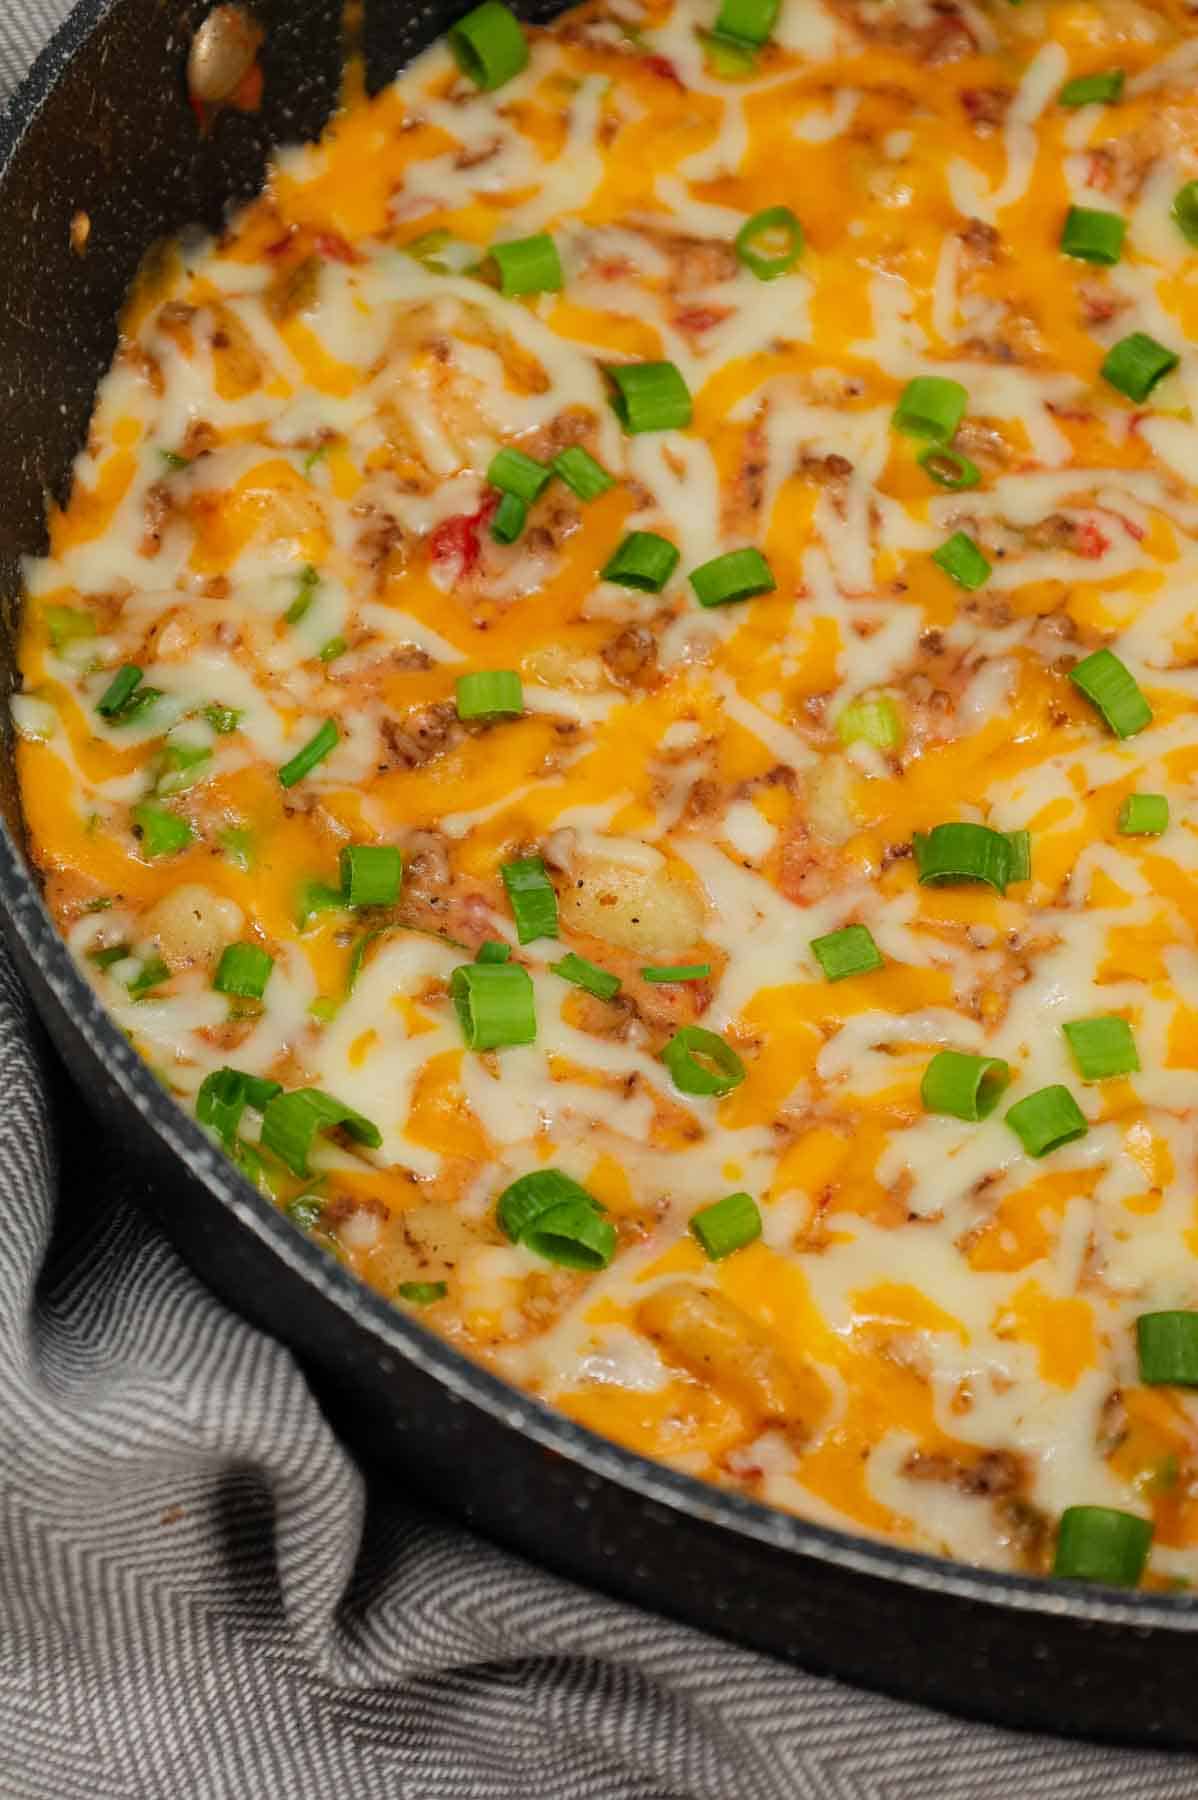 Cheeseburger Gnocchi is a hearty ground beef dinner recipe loaded with potato gnocchi, Rotel, chopped green onions and shredded cheese with a creamy sauce made from cheddar soup and milk.